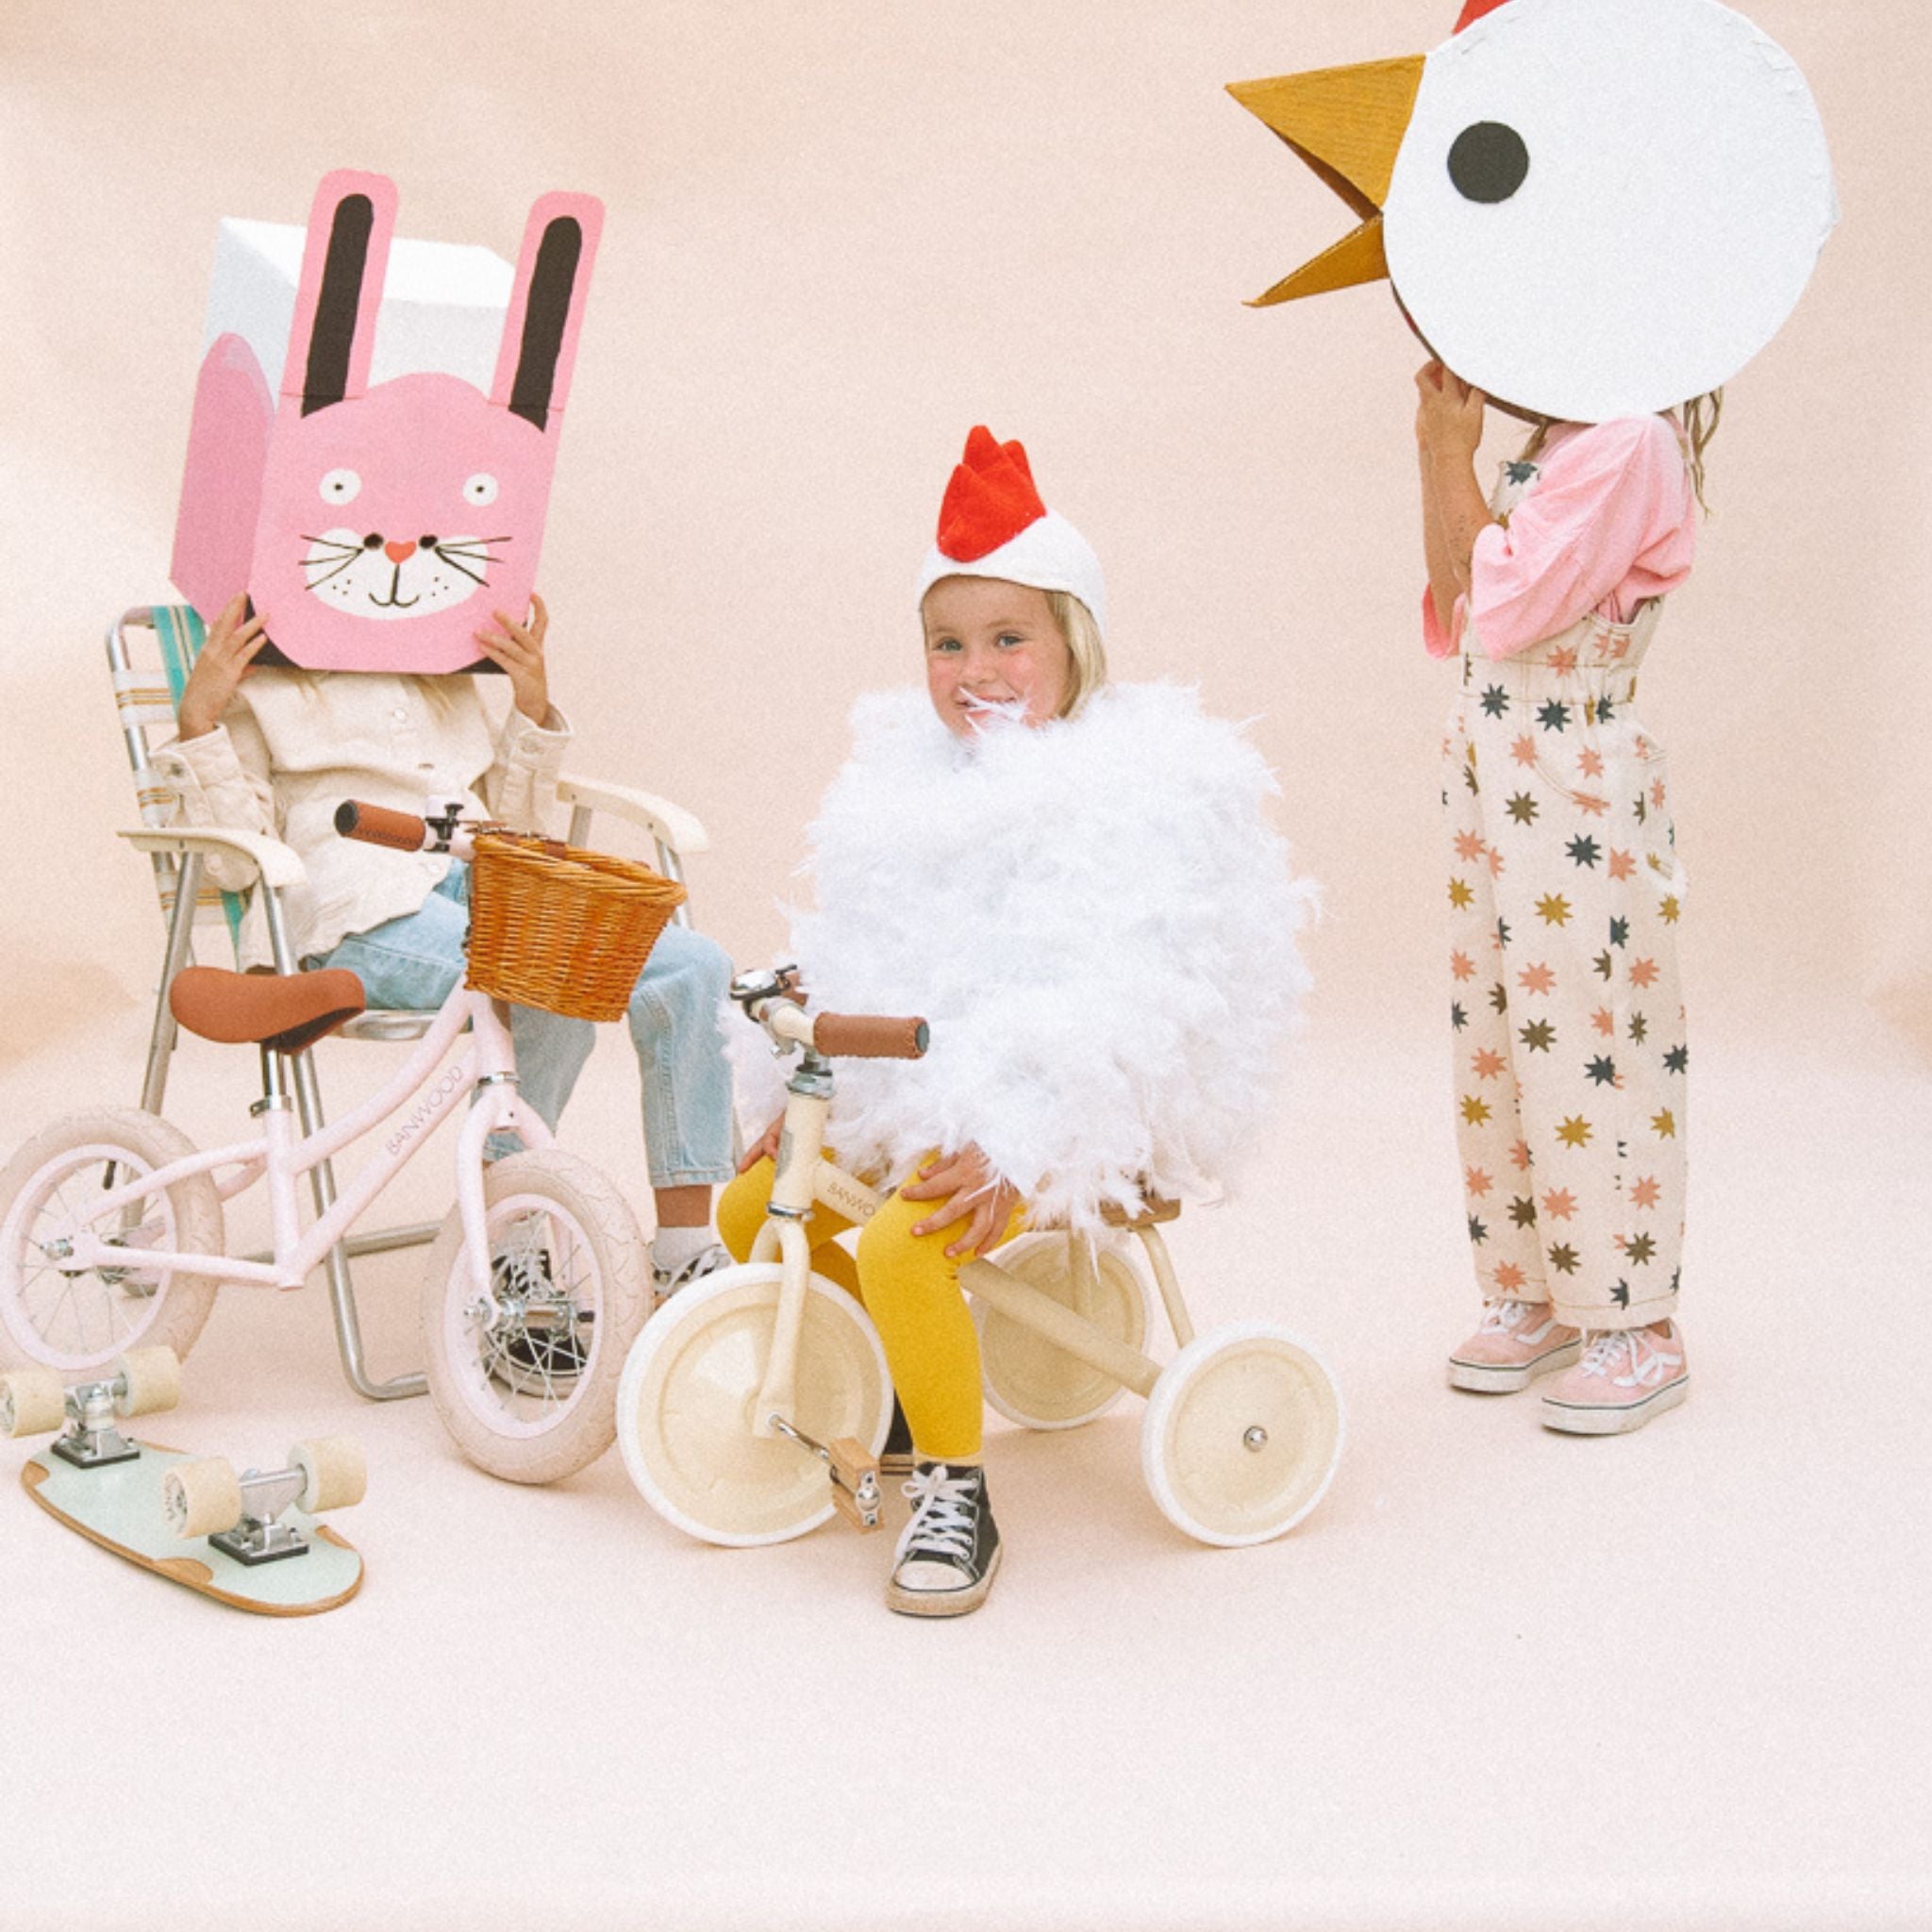 Cozy Kids: The ultimate destination for Easter gifts